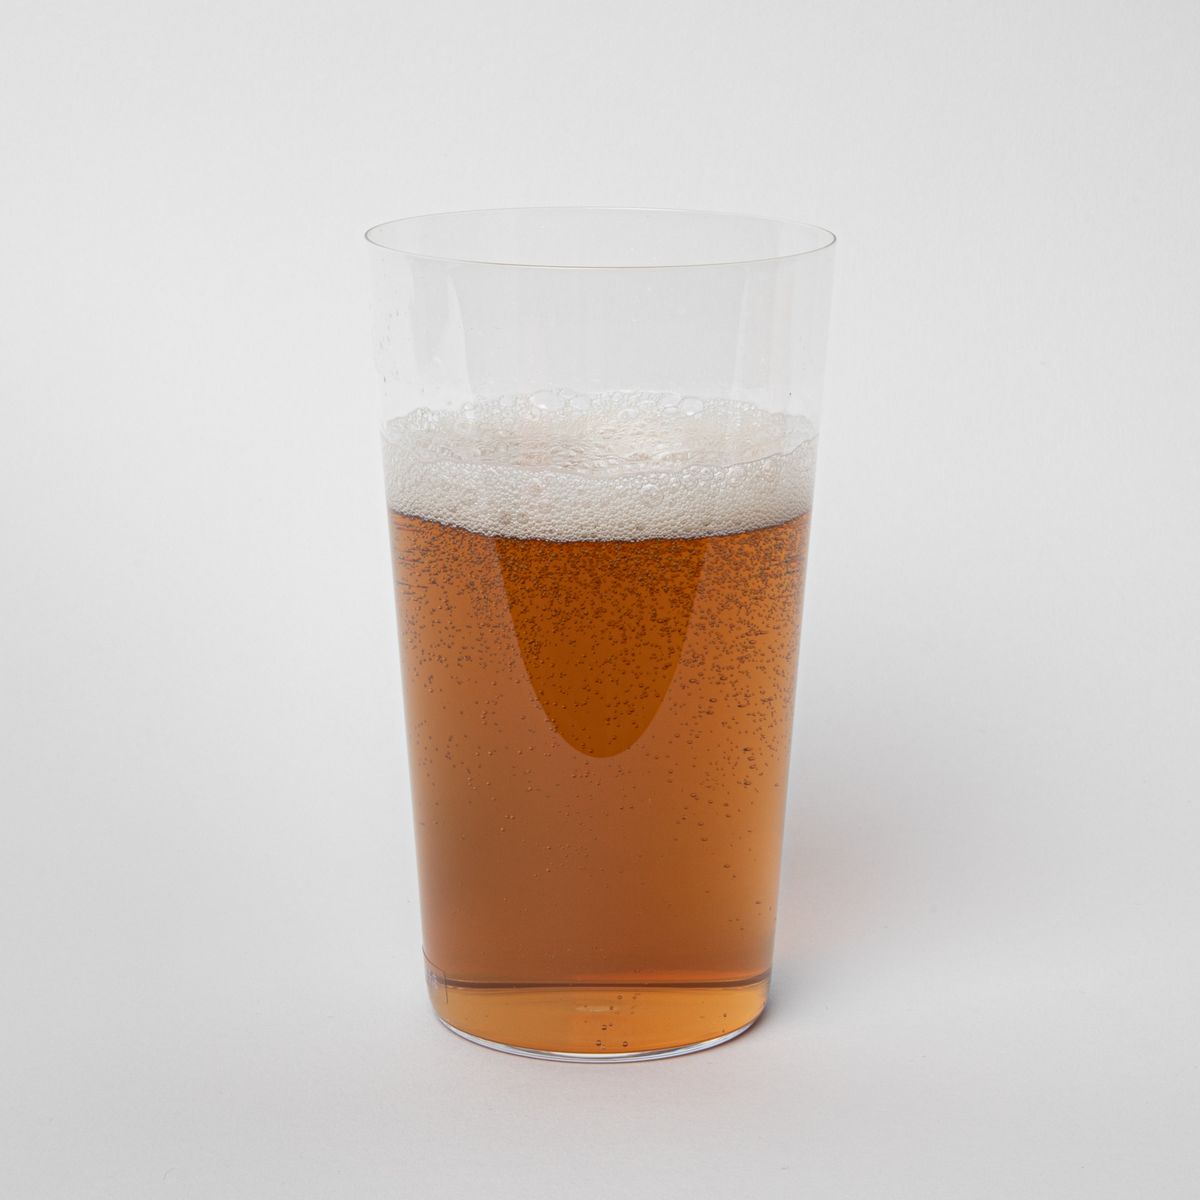 Clear simple beer glass filled with beer